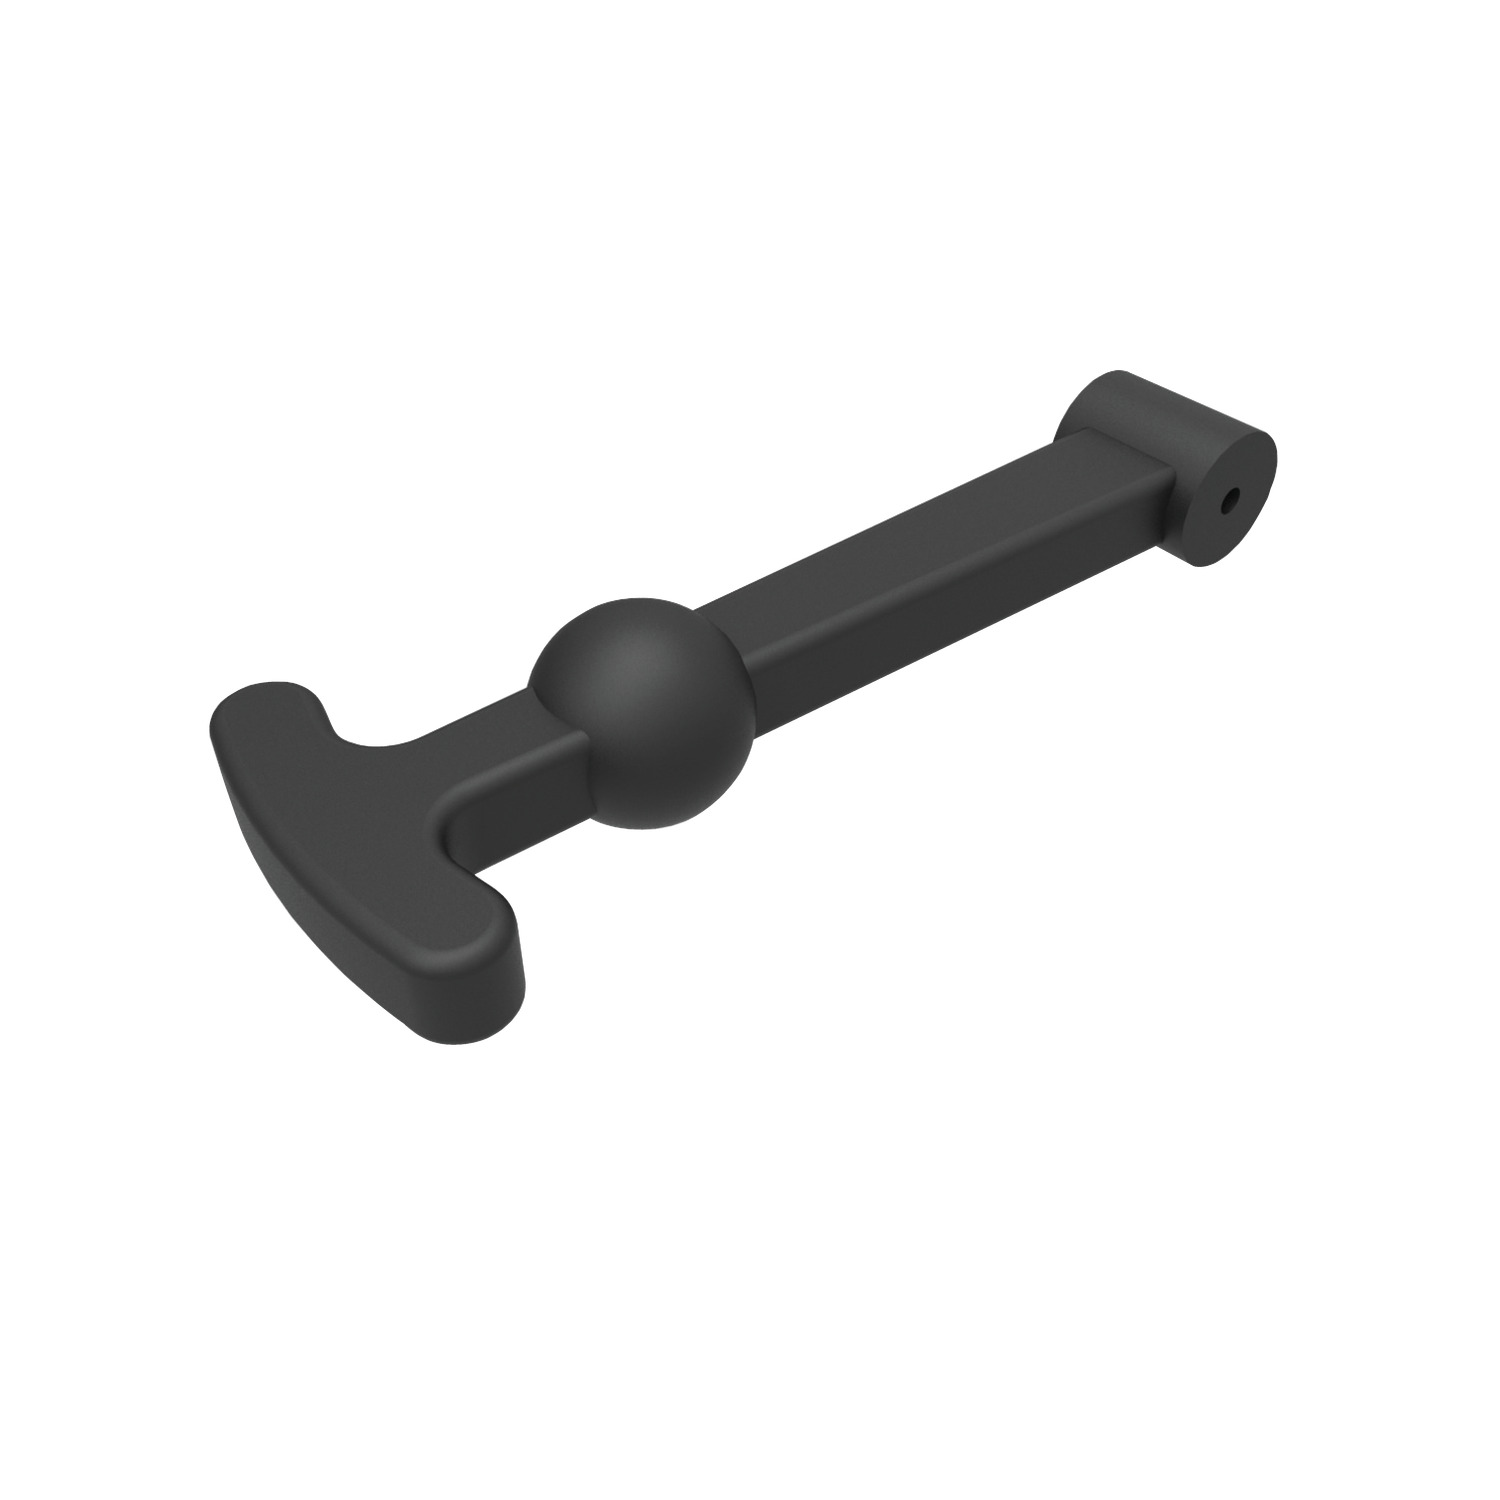 Product J0710, Draw Latches flexible - T-handle / 